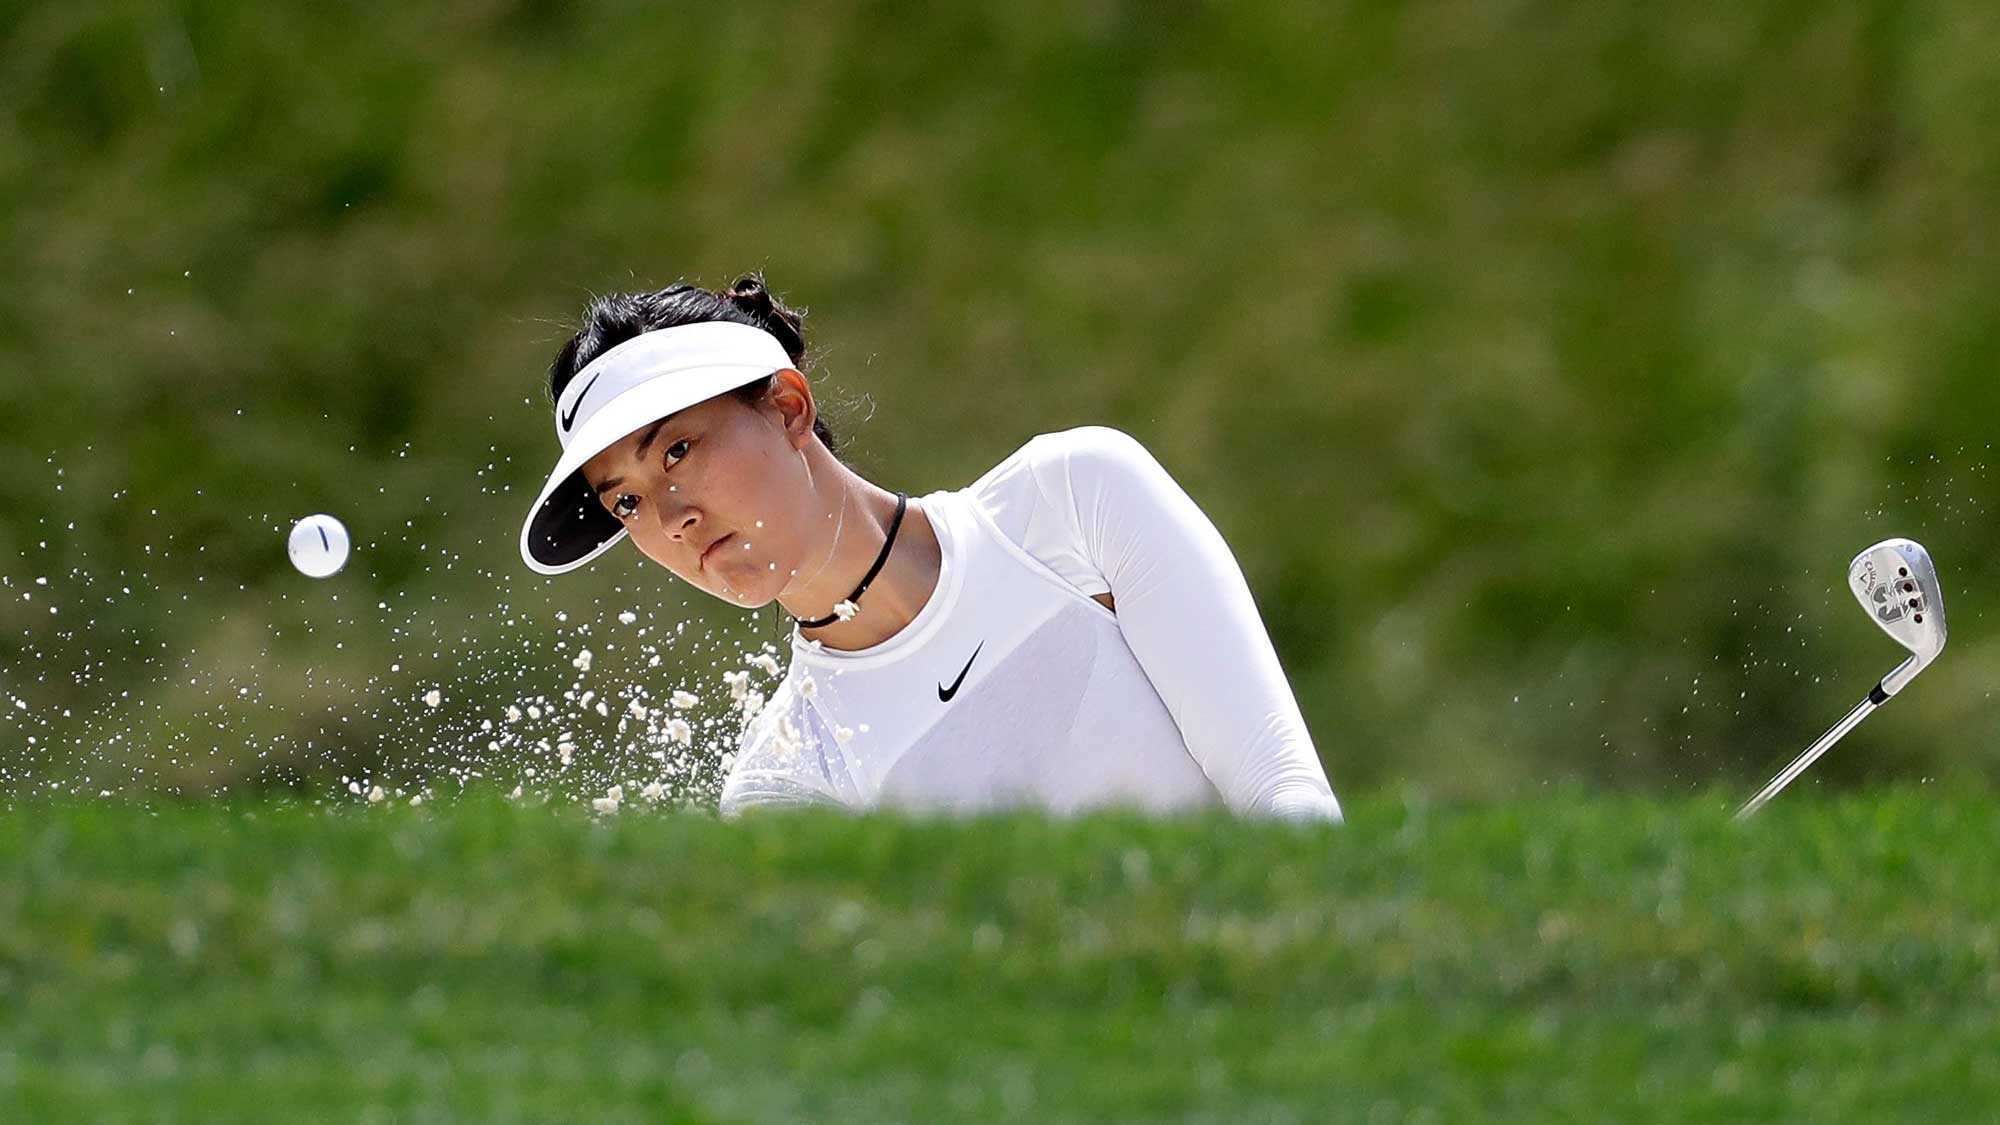 Michelle Wie hits from a green side bunker on the seventh hole during the first round of the 2017 KPMG PGA Championship